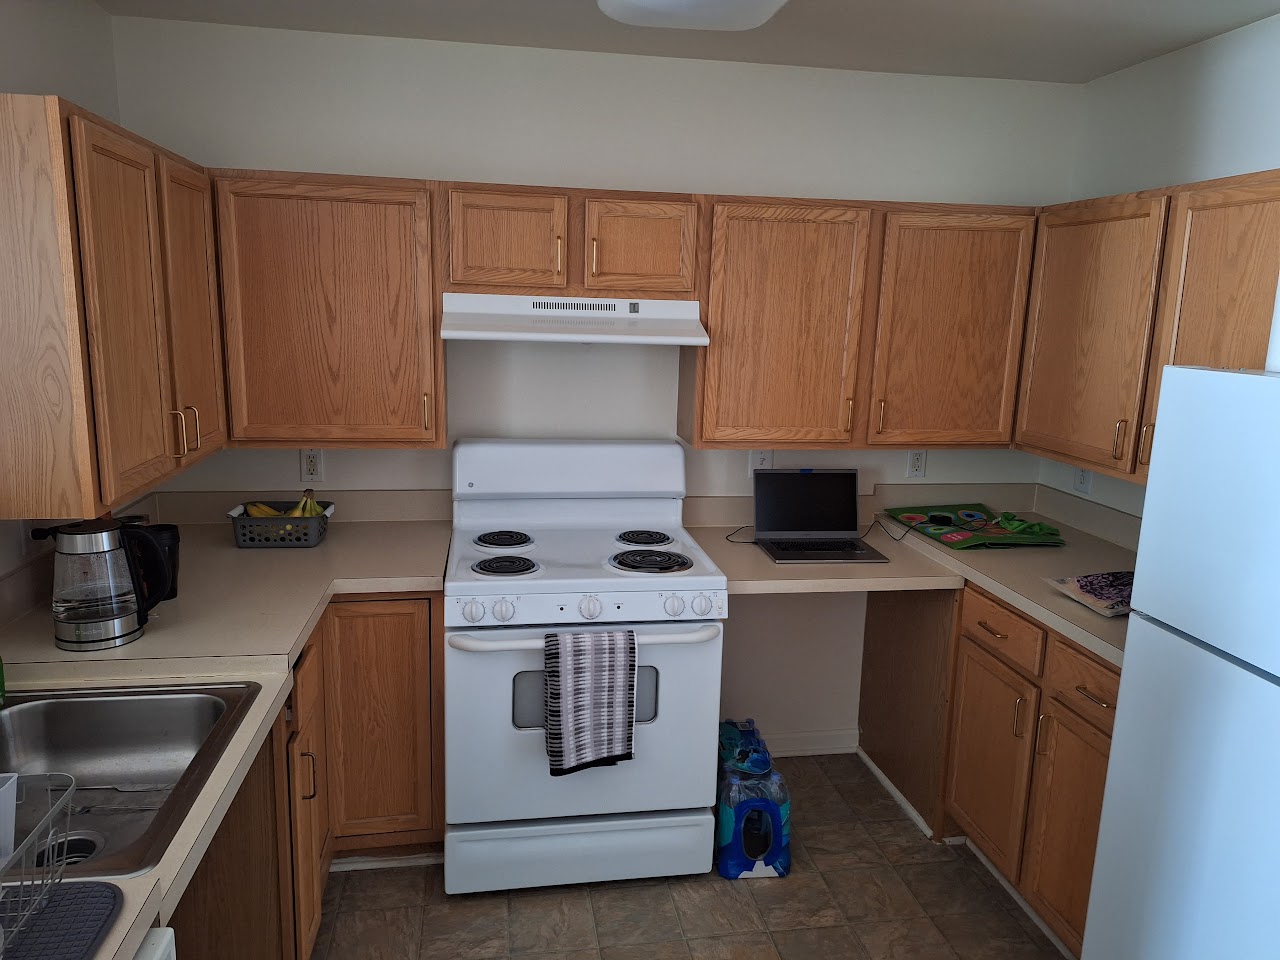 Photo of WALDORF JAYCEES. Affordable housing located at 11060 WEYMOUTH CT WALDORF, MD 20603